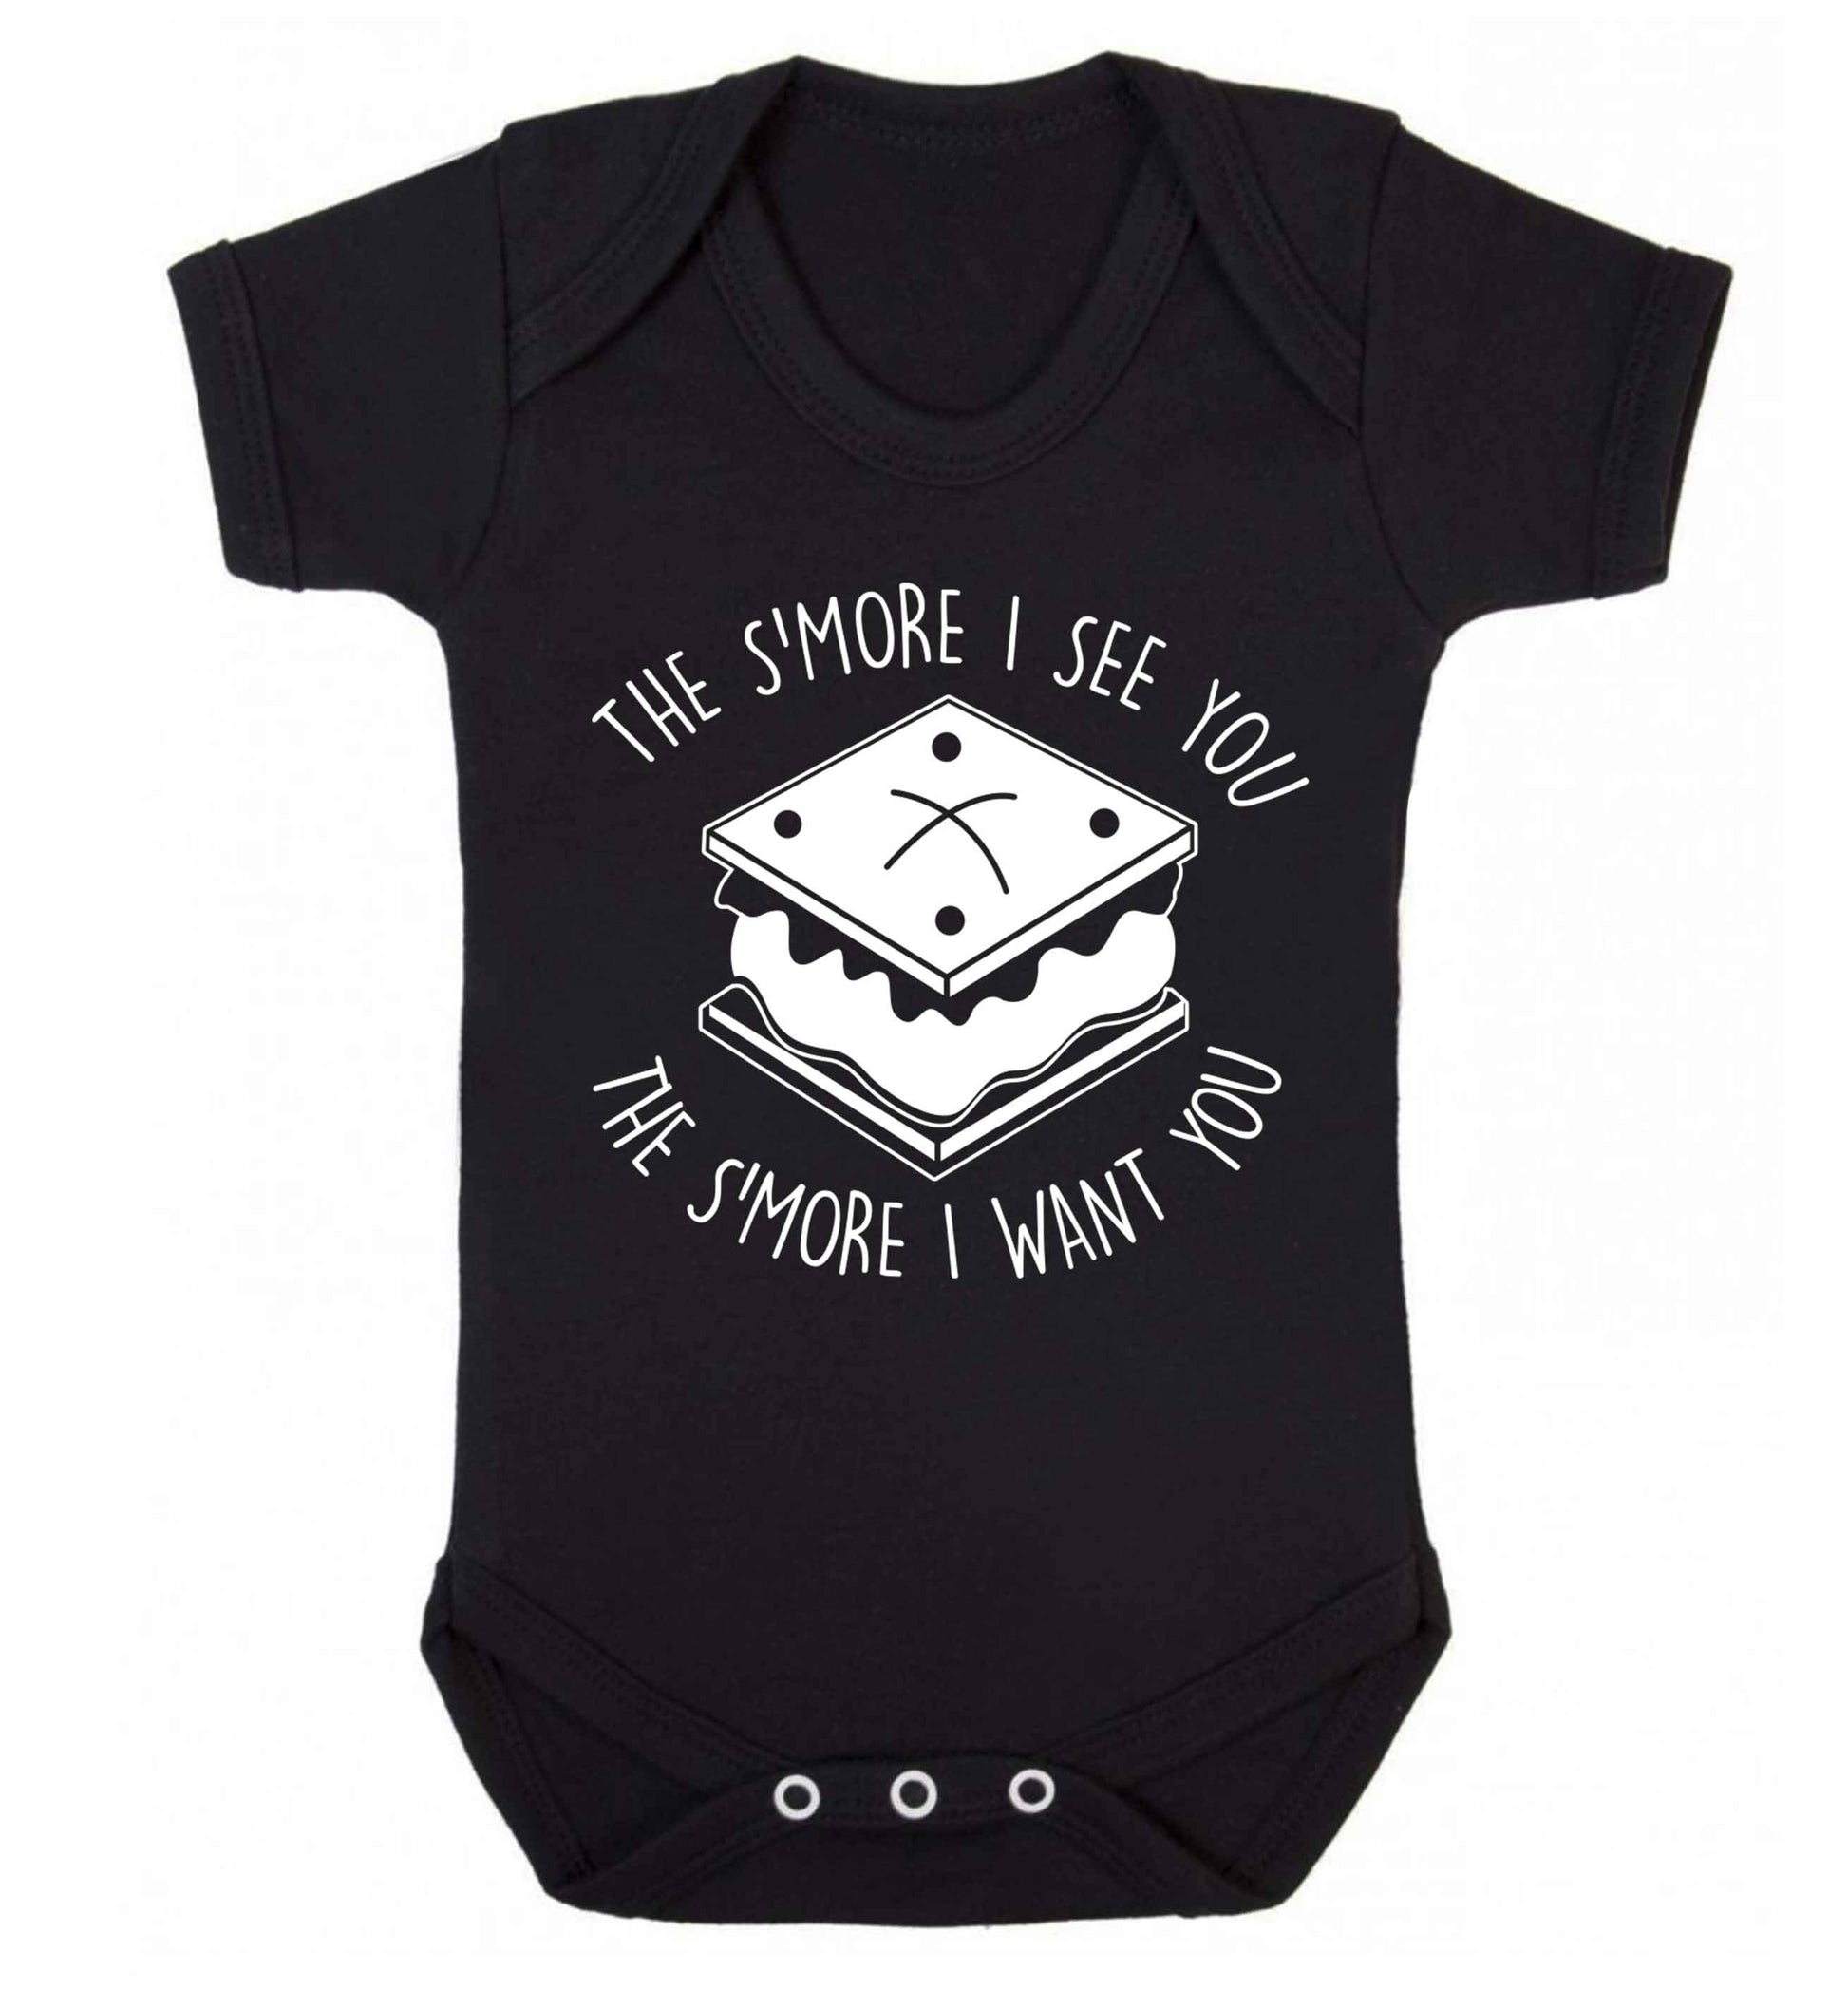 The s'more I see you the s'more I want you Baby Vest black 18-24 months